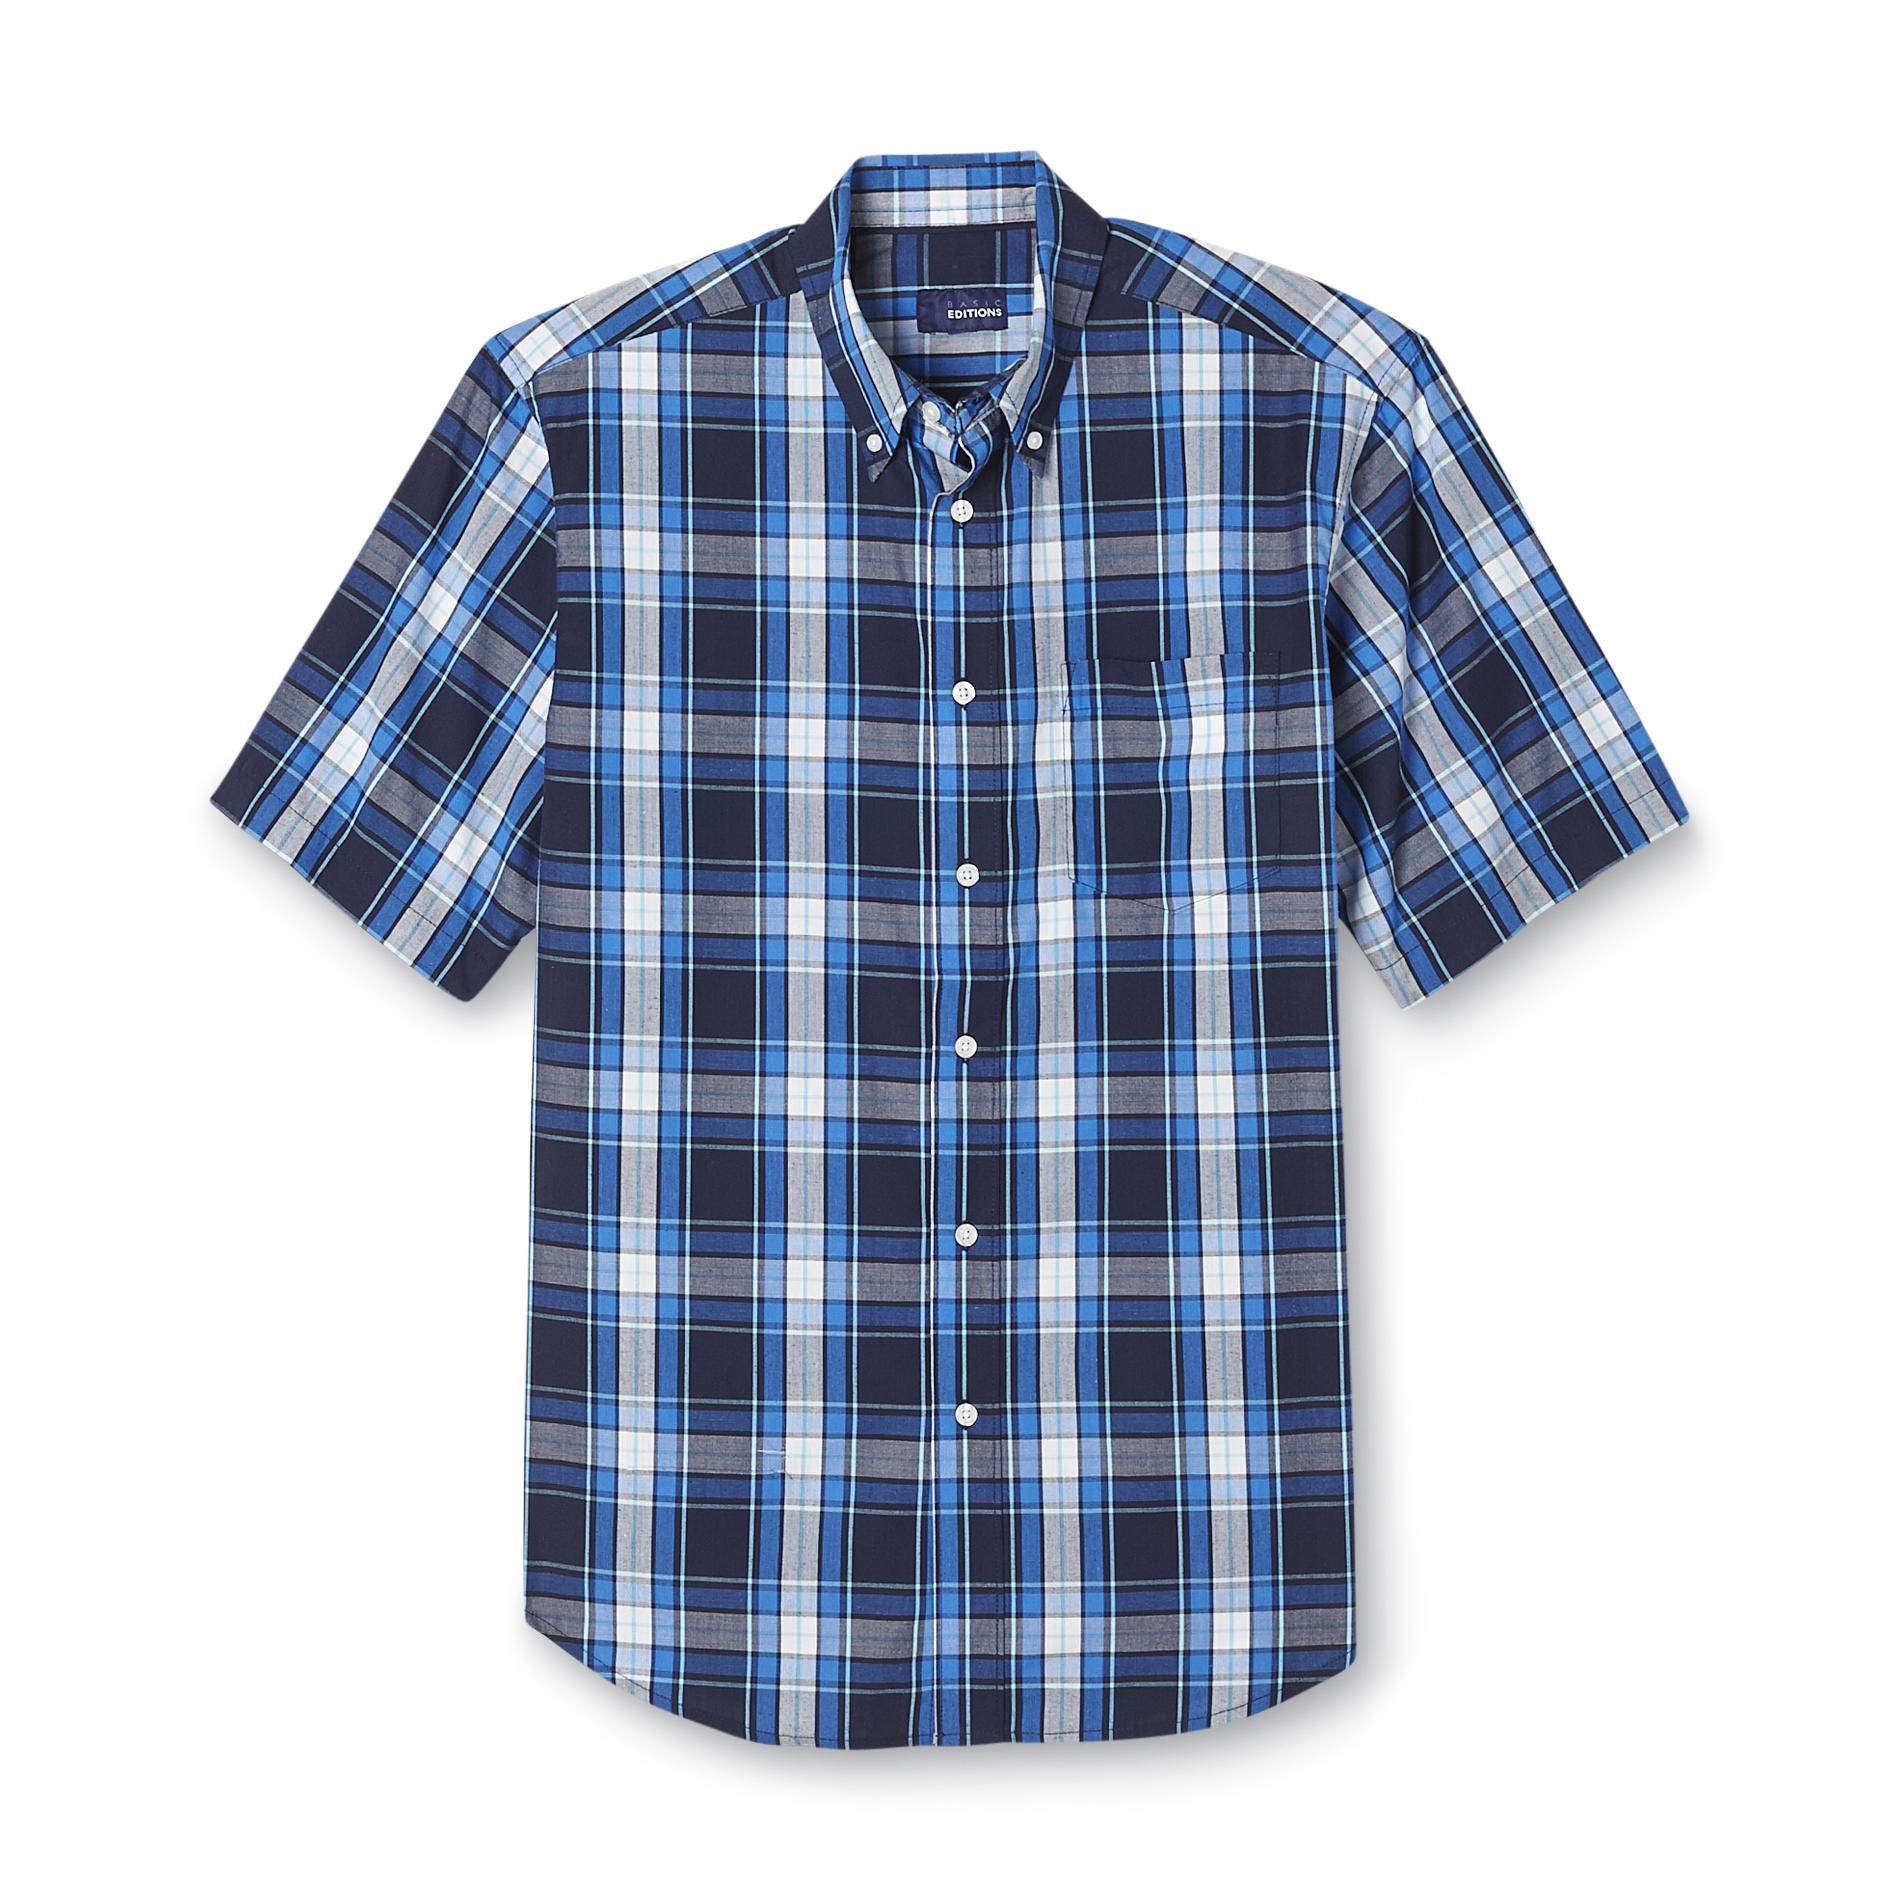 Basic Editions Men's Big & Tall Easy Care Woven Shirt - Plaid